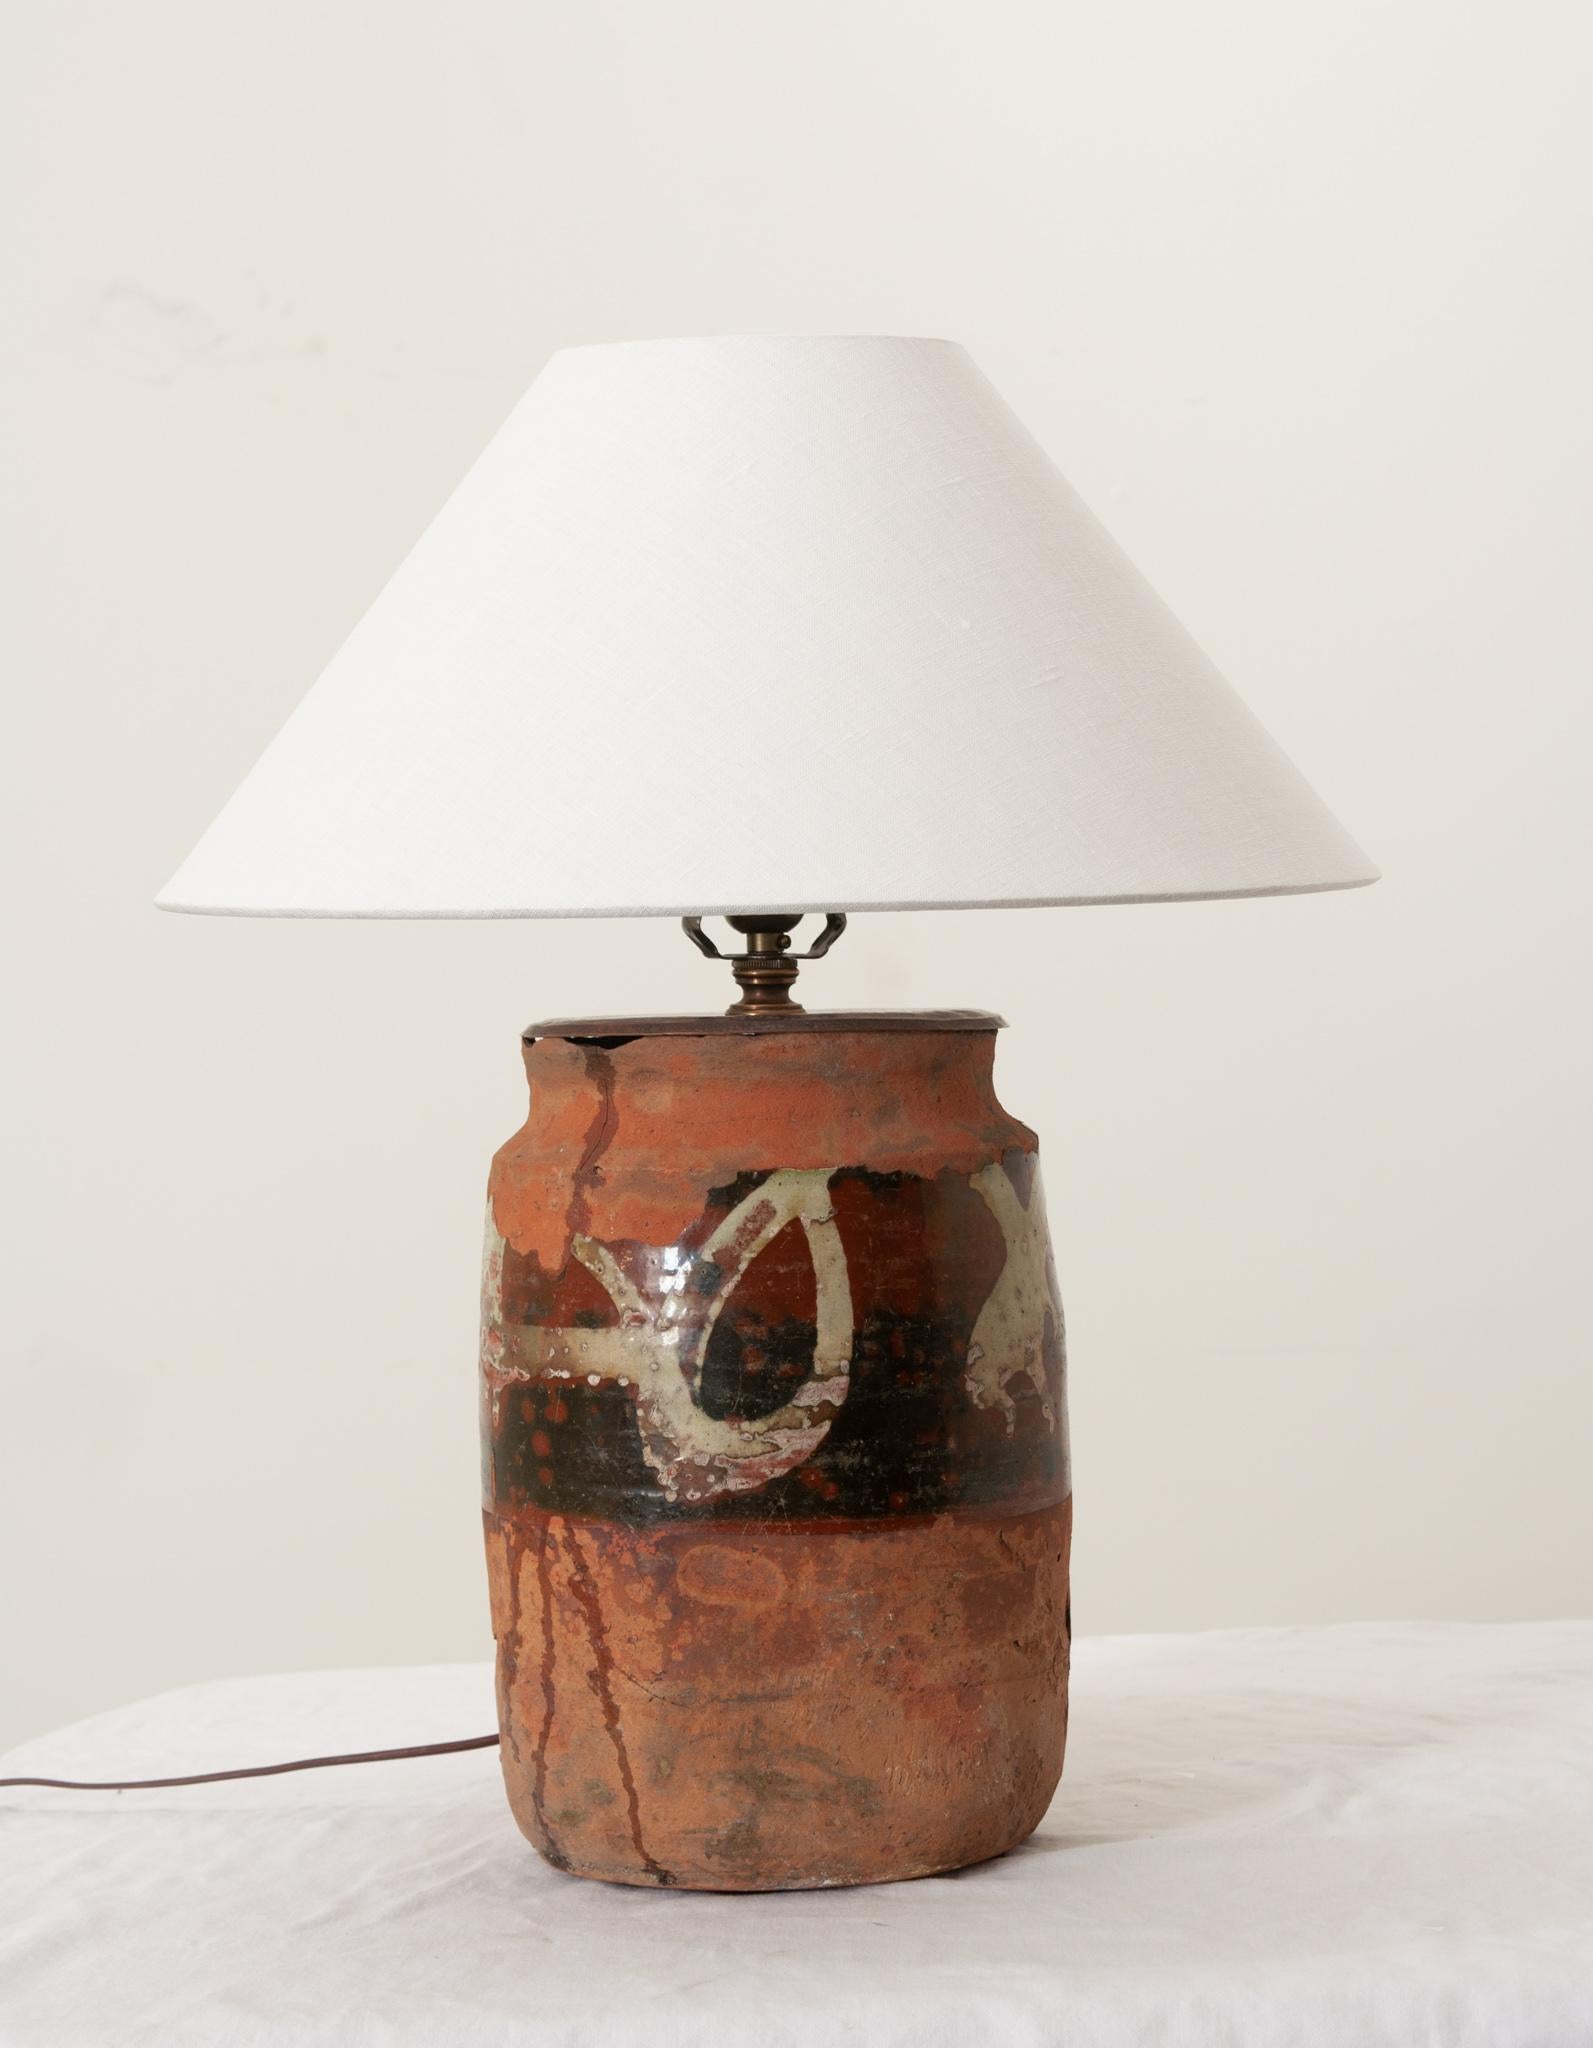 A wonderful terracotta vessel from France once used as an olive jar now upcycled into a table lamp featuring a uniquely patterned glaze finish and modern linen shade. Newly wired in the USA with all UL approved parts and topped with patinated brass.